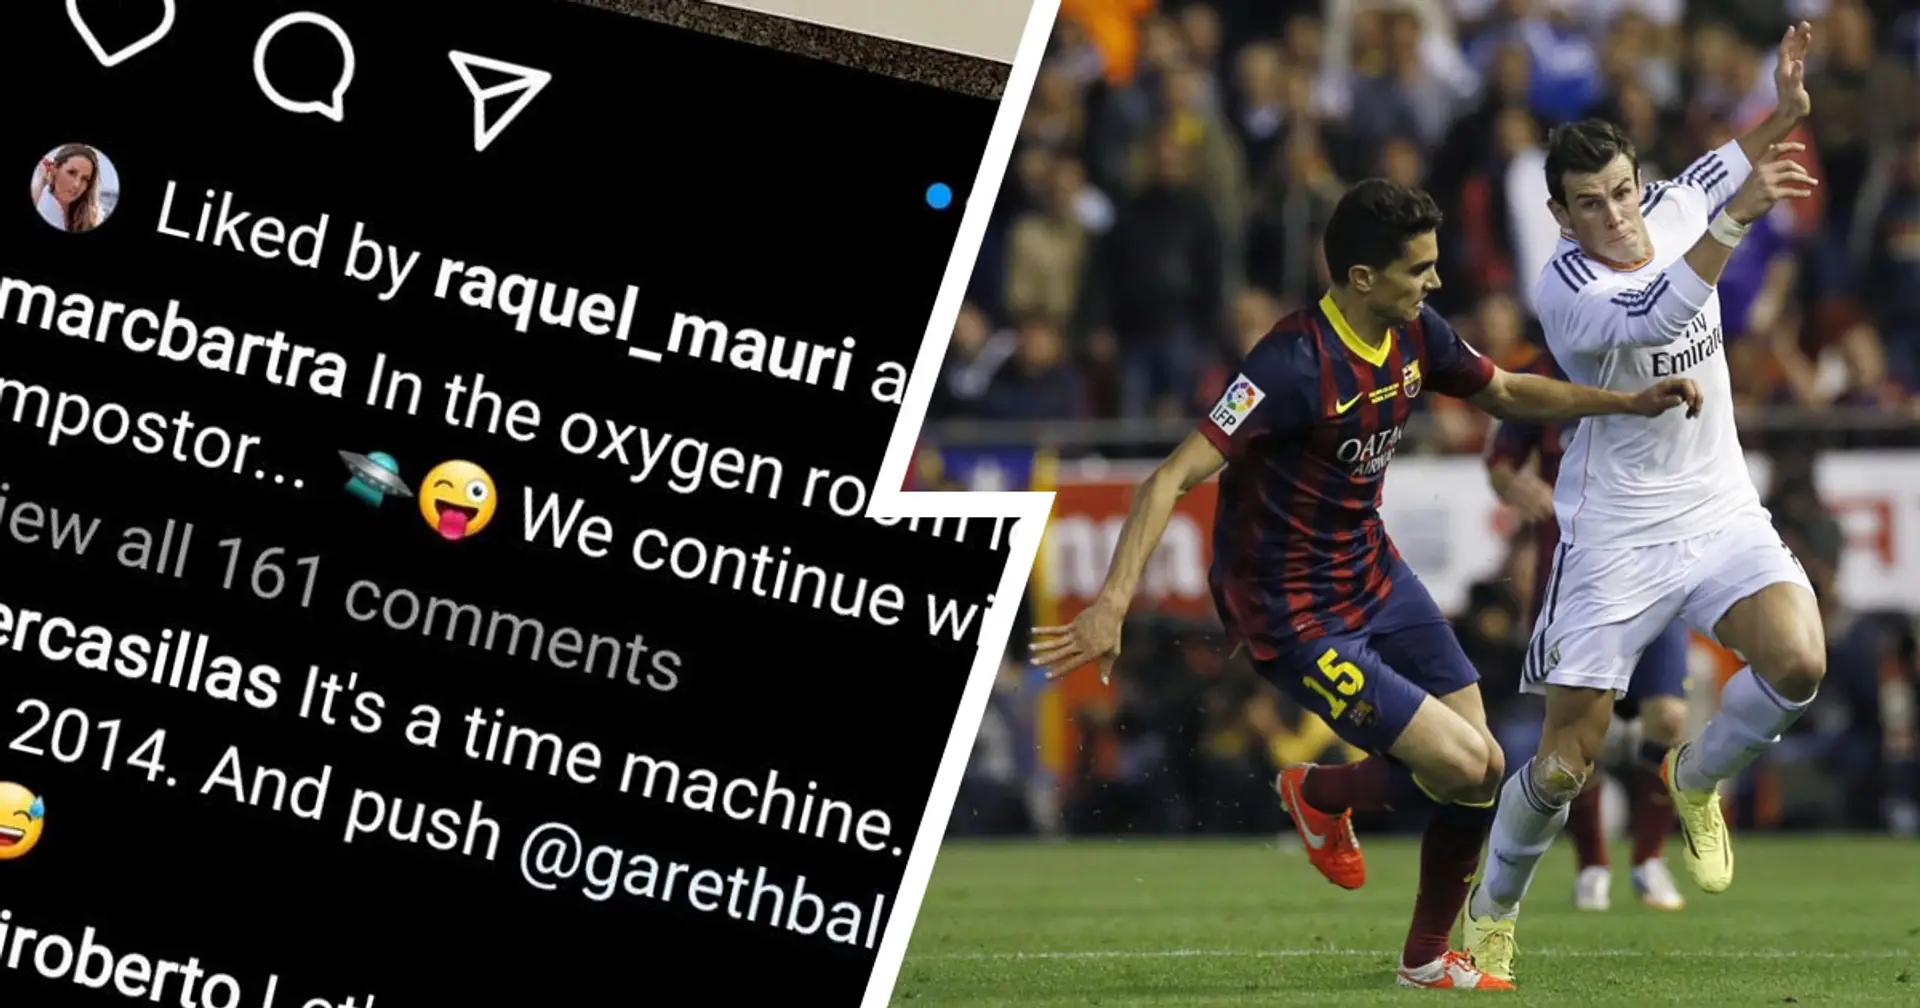 Casillas brilliantly trolls ex-Barca player Bartra by reminding him of that Bale goal from Copa del Rey final